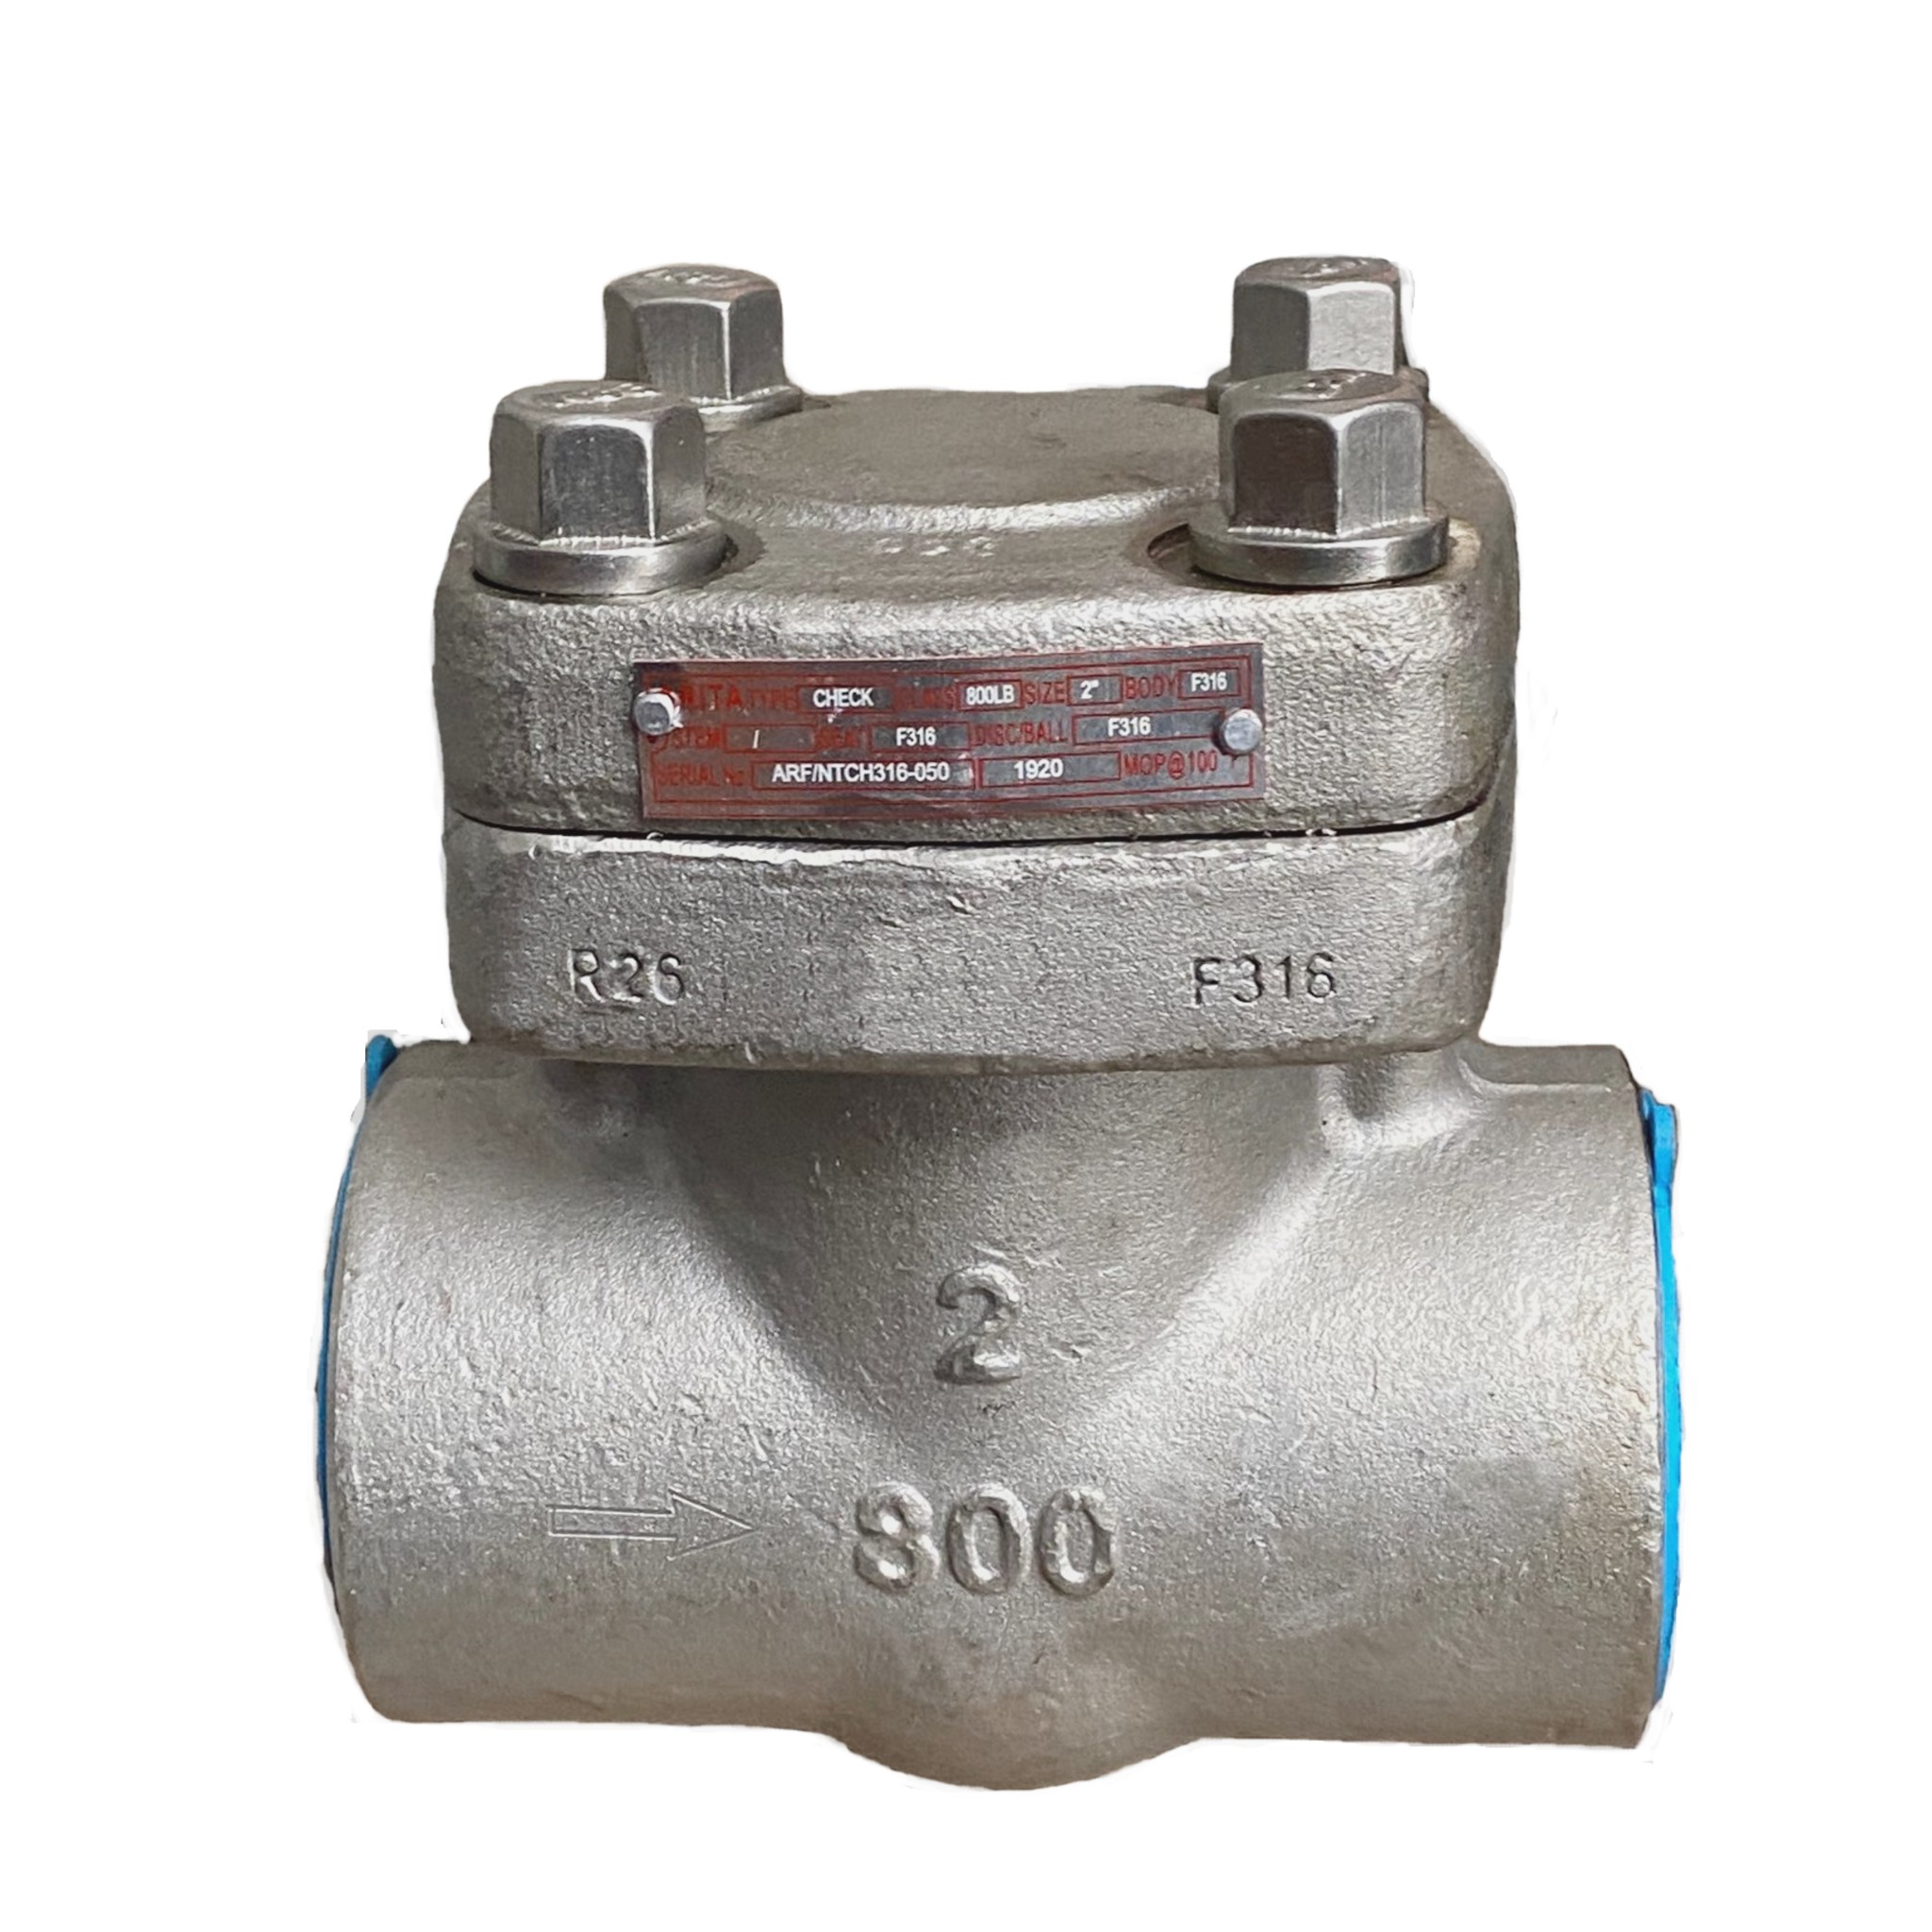 forged-stainless-steel-class-800-check-valve-npt-unimech-asia-pacific